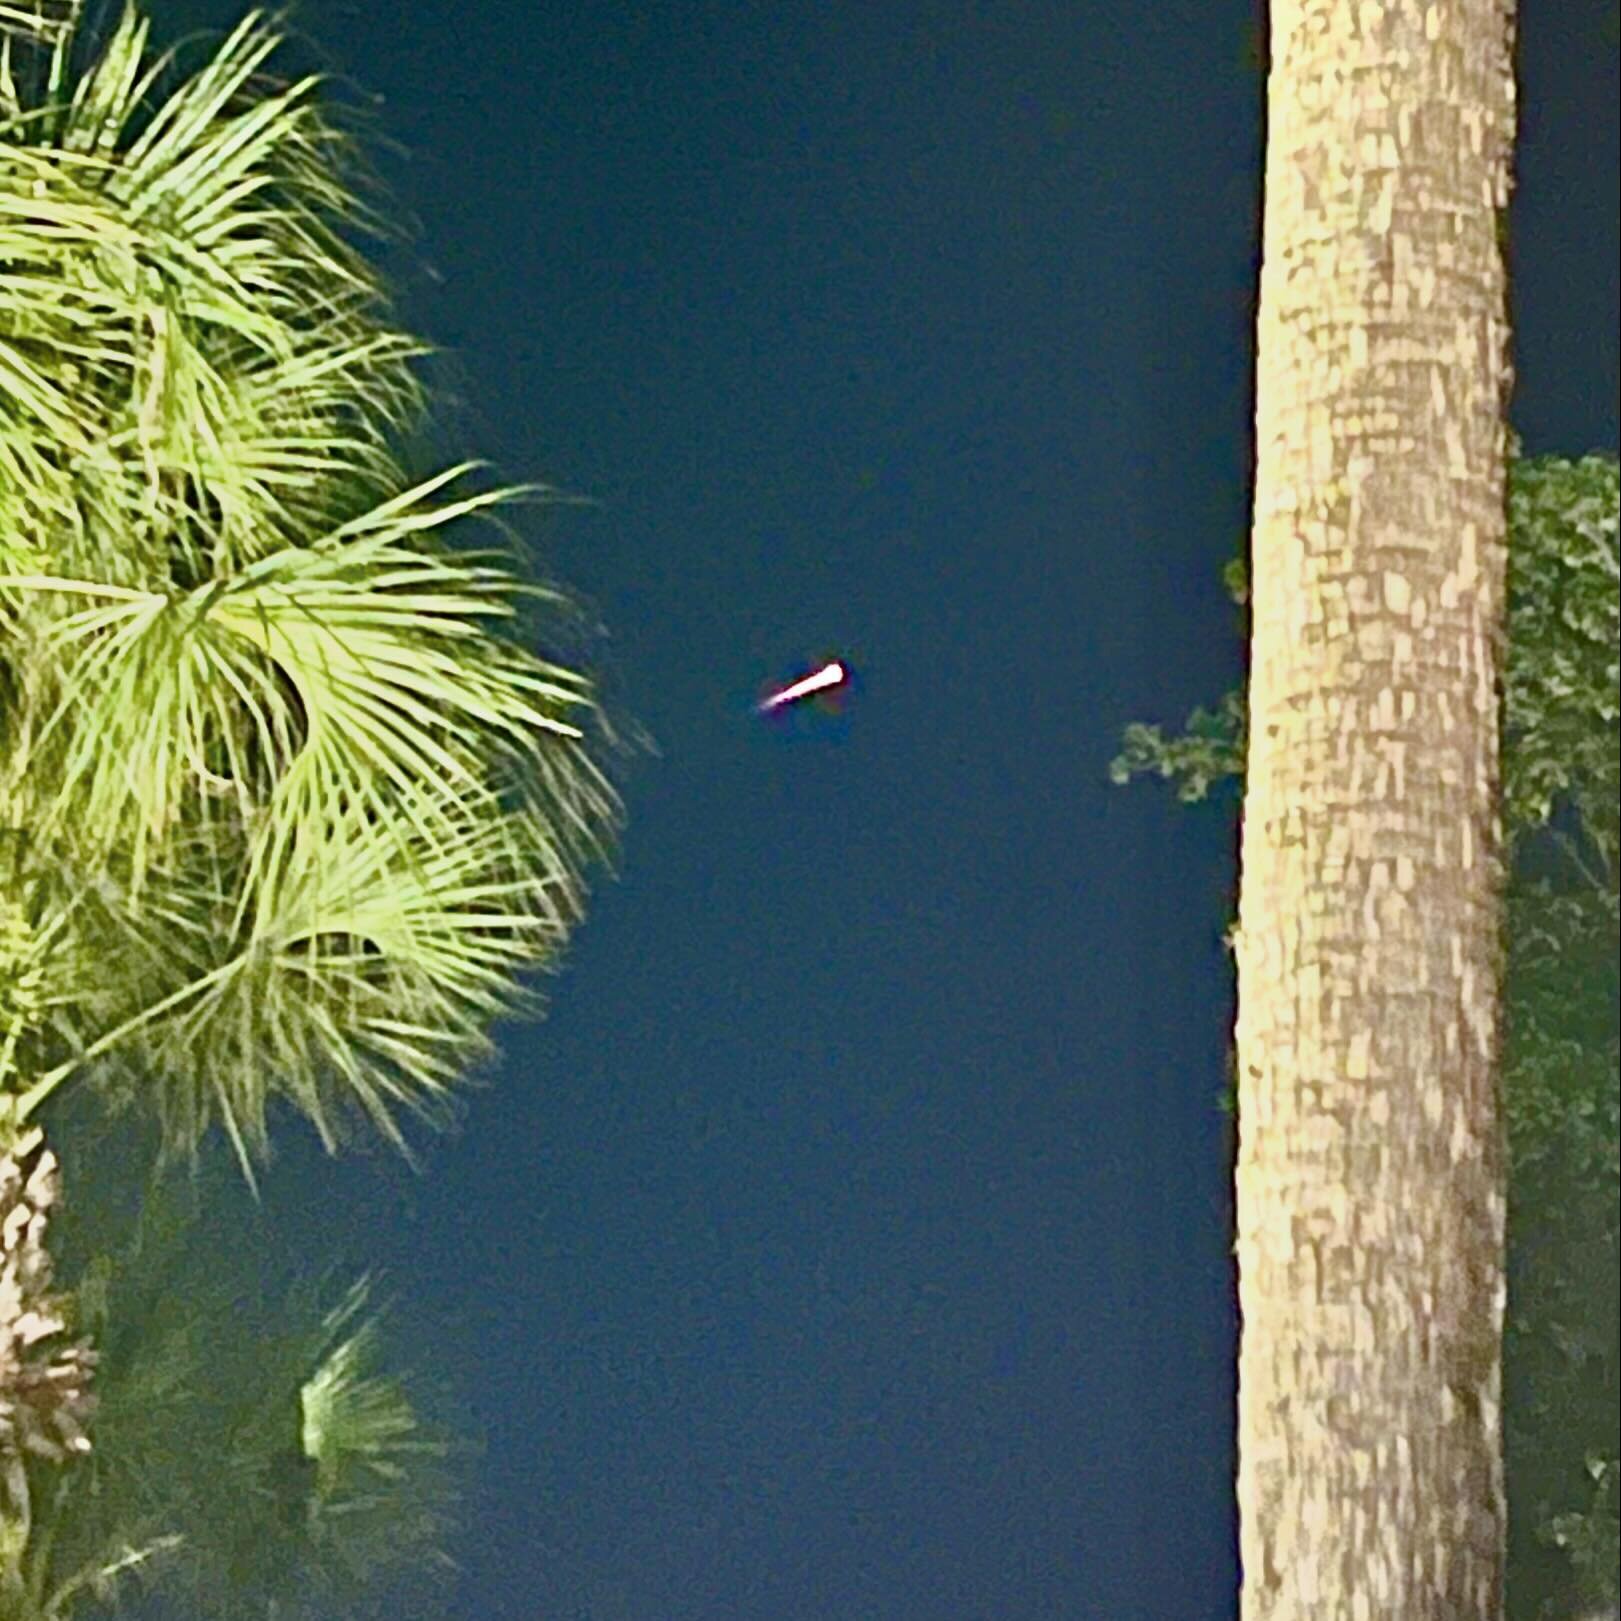 Caught a rocket launch sighting down here at ICFA